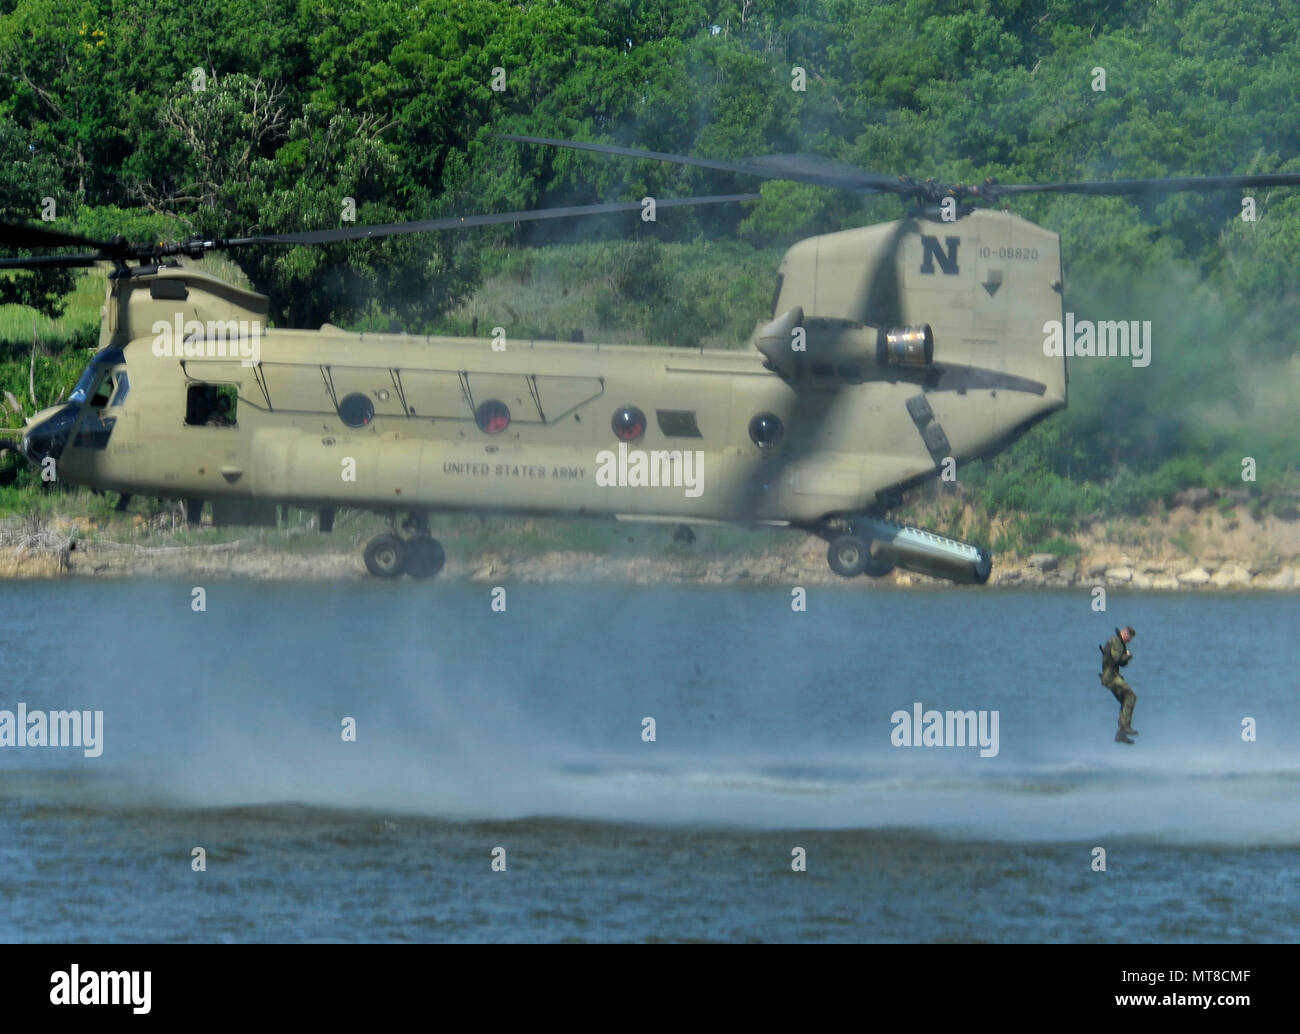 A member of the Czech Armed Forces' 7th Mechanical Brigade takes to the air while participating in a helocast waterdrop into Milford Lake near Fort Riley, Kan., June 9, with members of the Nebraska Army National Guard's 1-134th Cavalry. The exercise, which involved dropping from a Nebraska Army National Guard CH-47 Chinook helicopter and then swimming to a rubber raft, involved a total of 26 Soldiers from the Czech Republic who were training with the Nebraska cavalry Soldiers at Fort Riley. Stock Photo